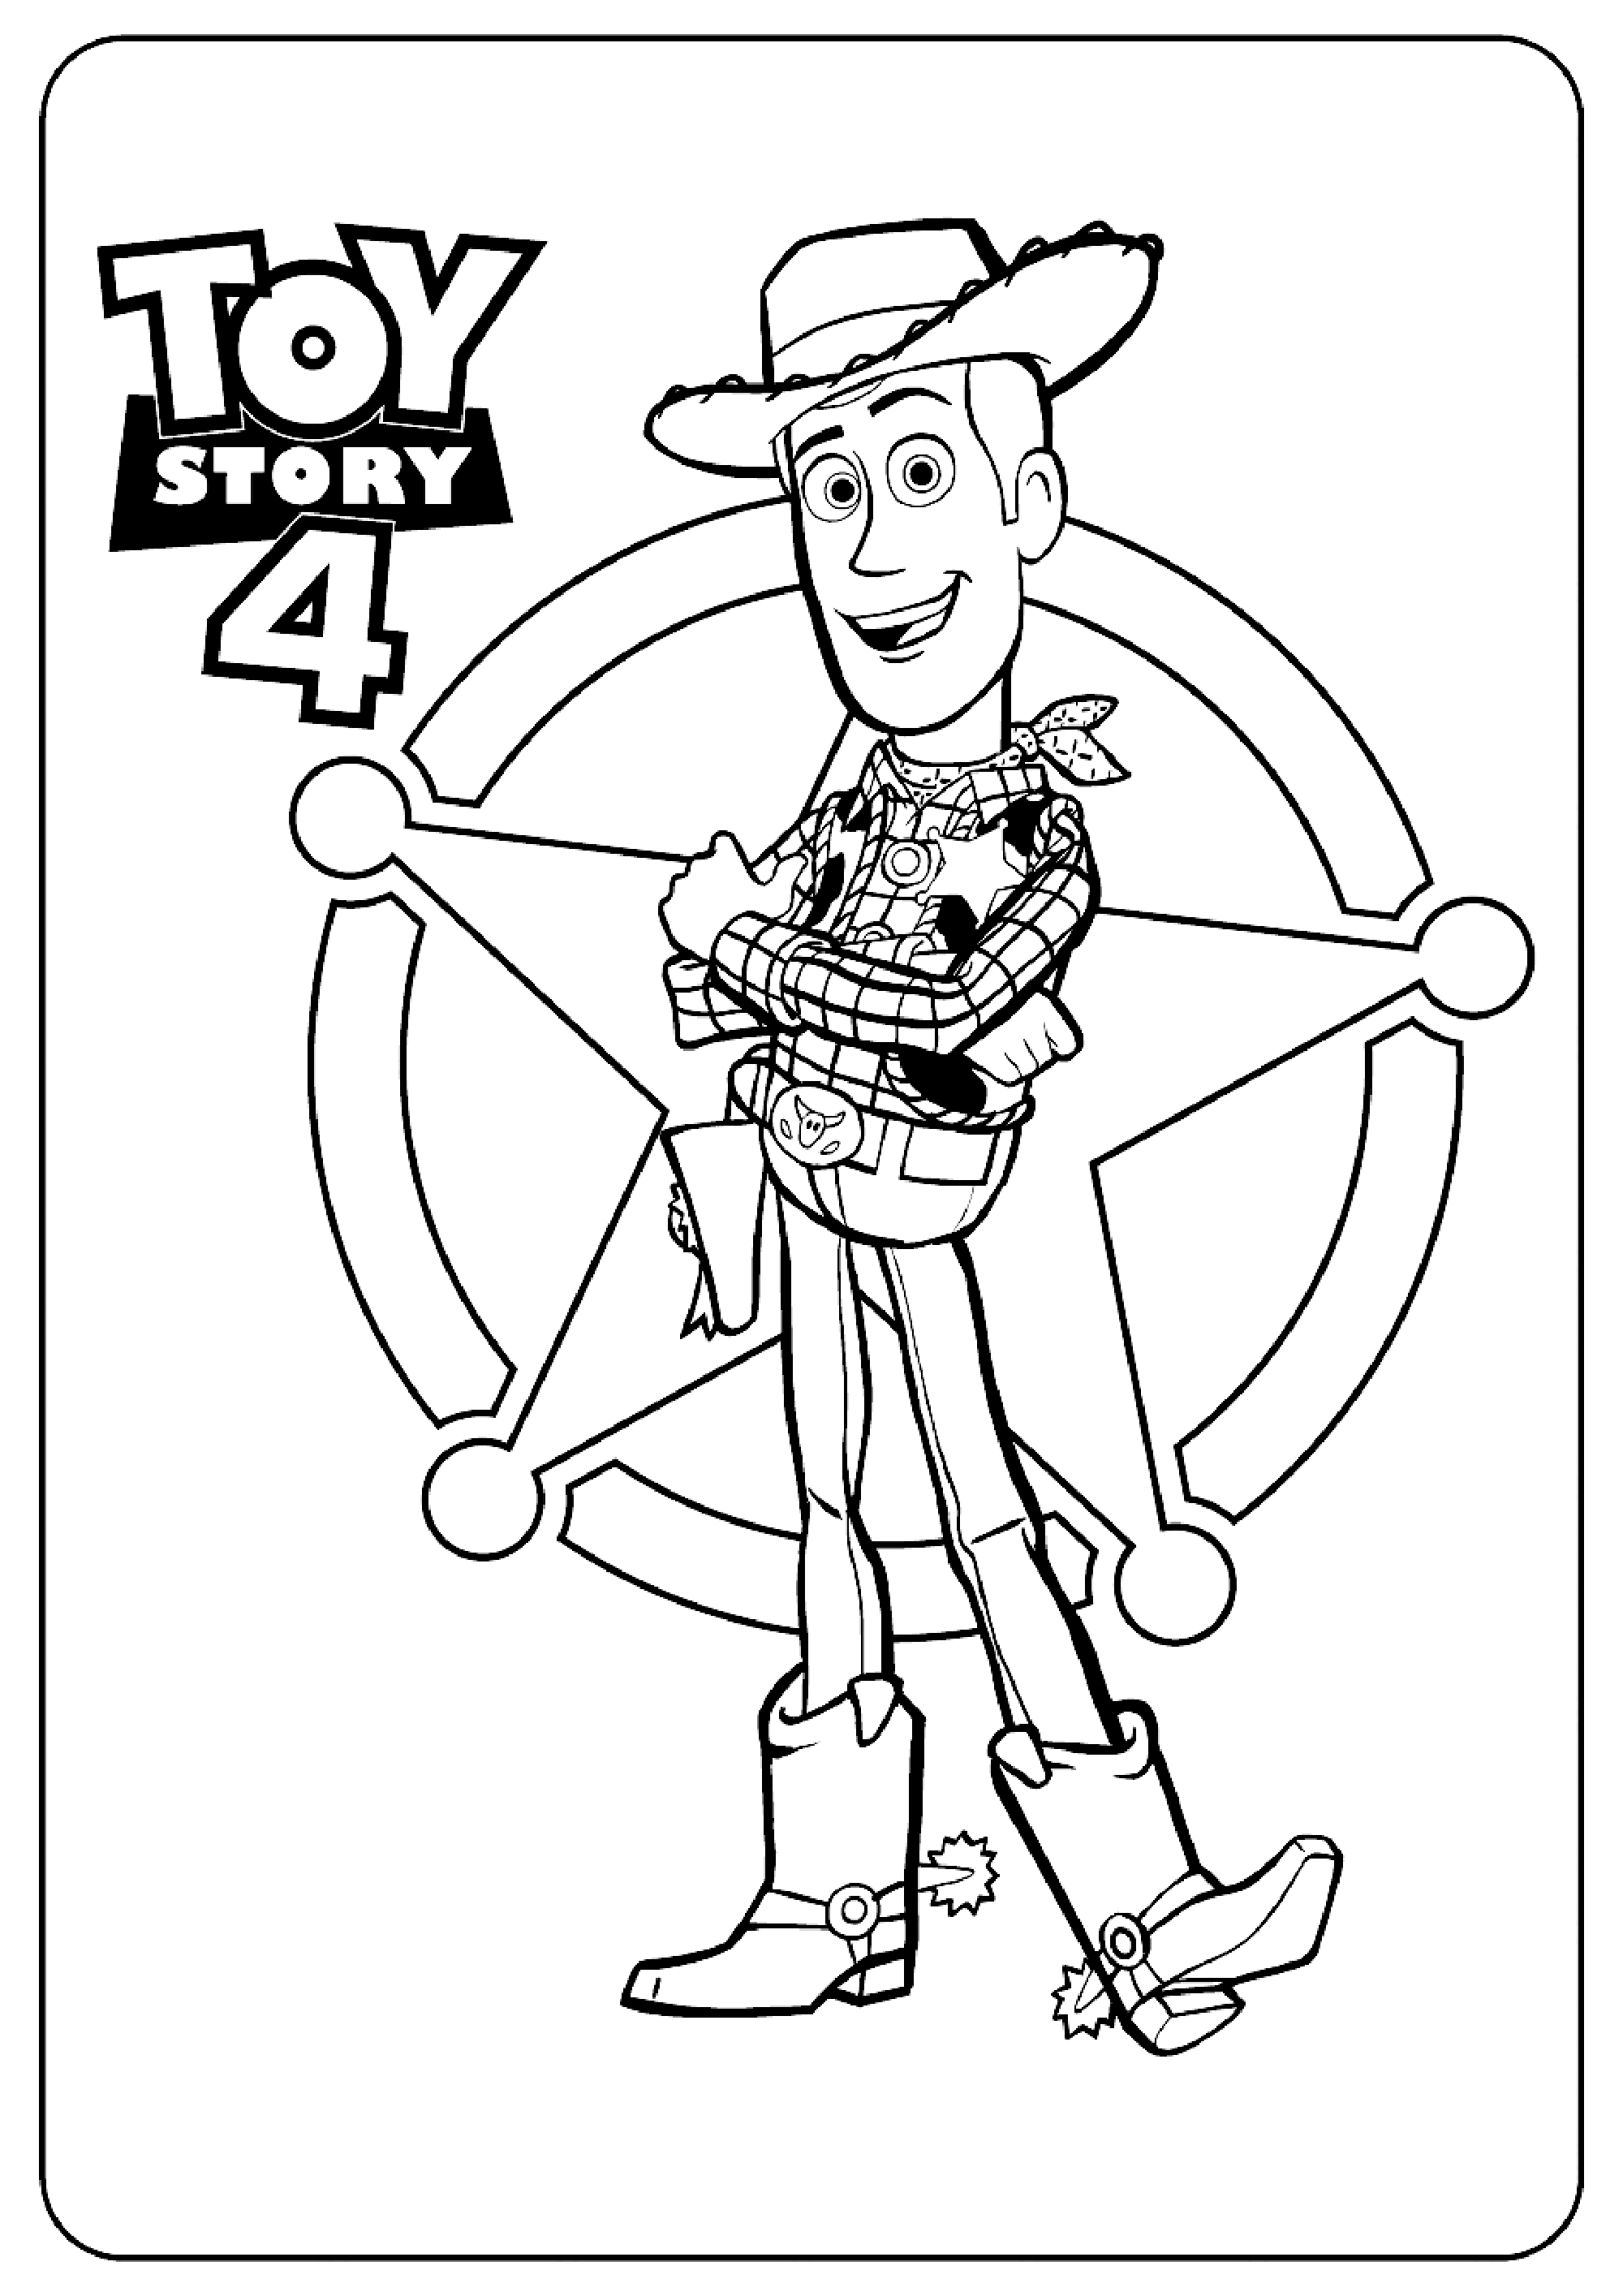 Woody Toy Story 4 (Disney / pixar) coloring pages Toy Story 4 Kids